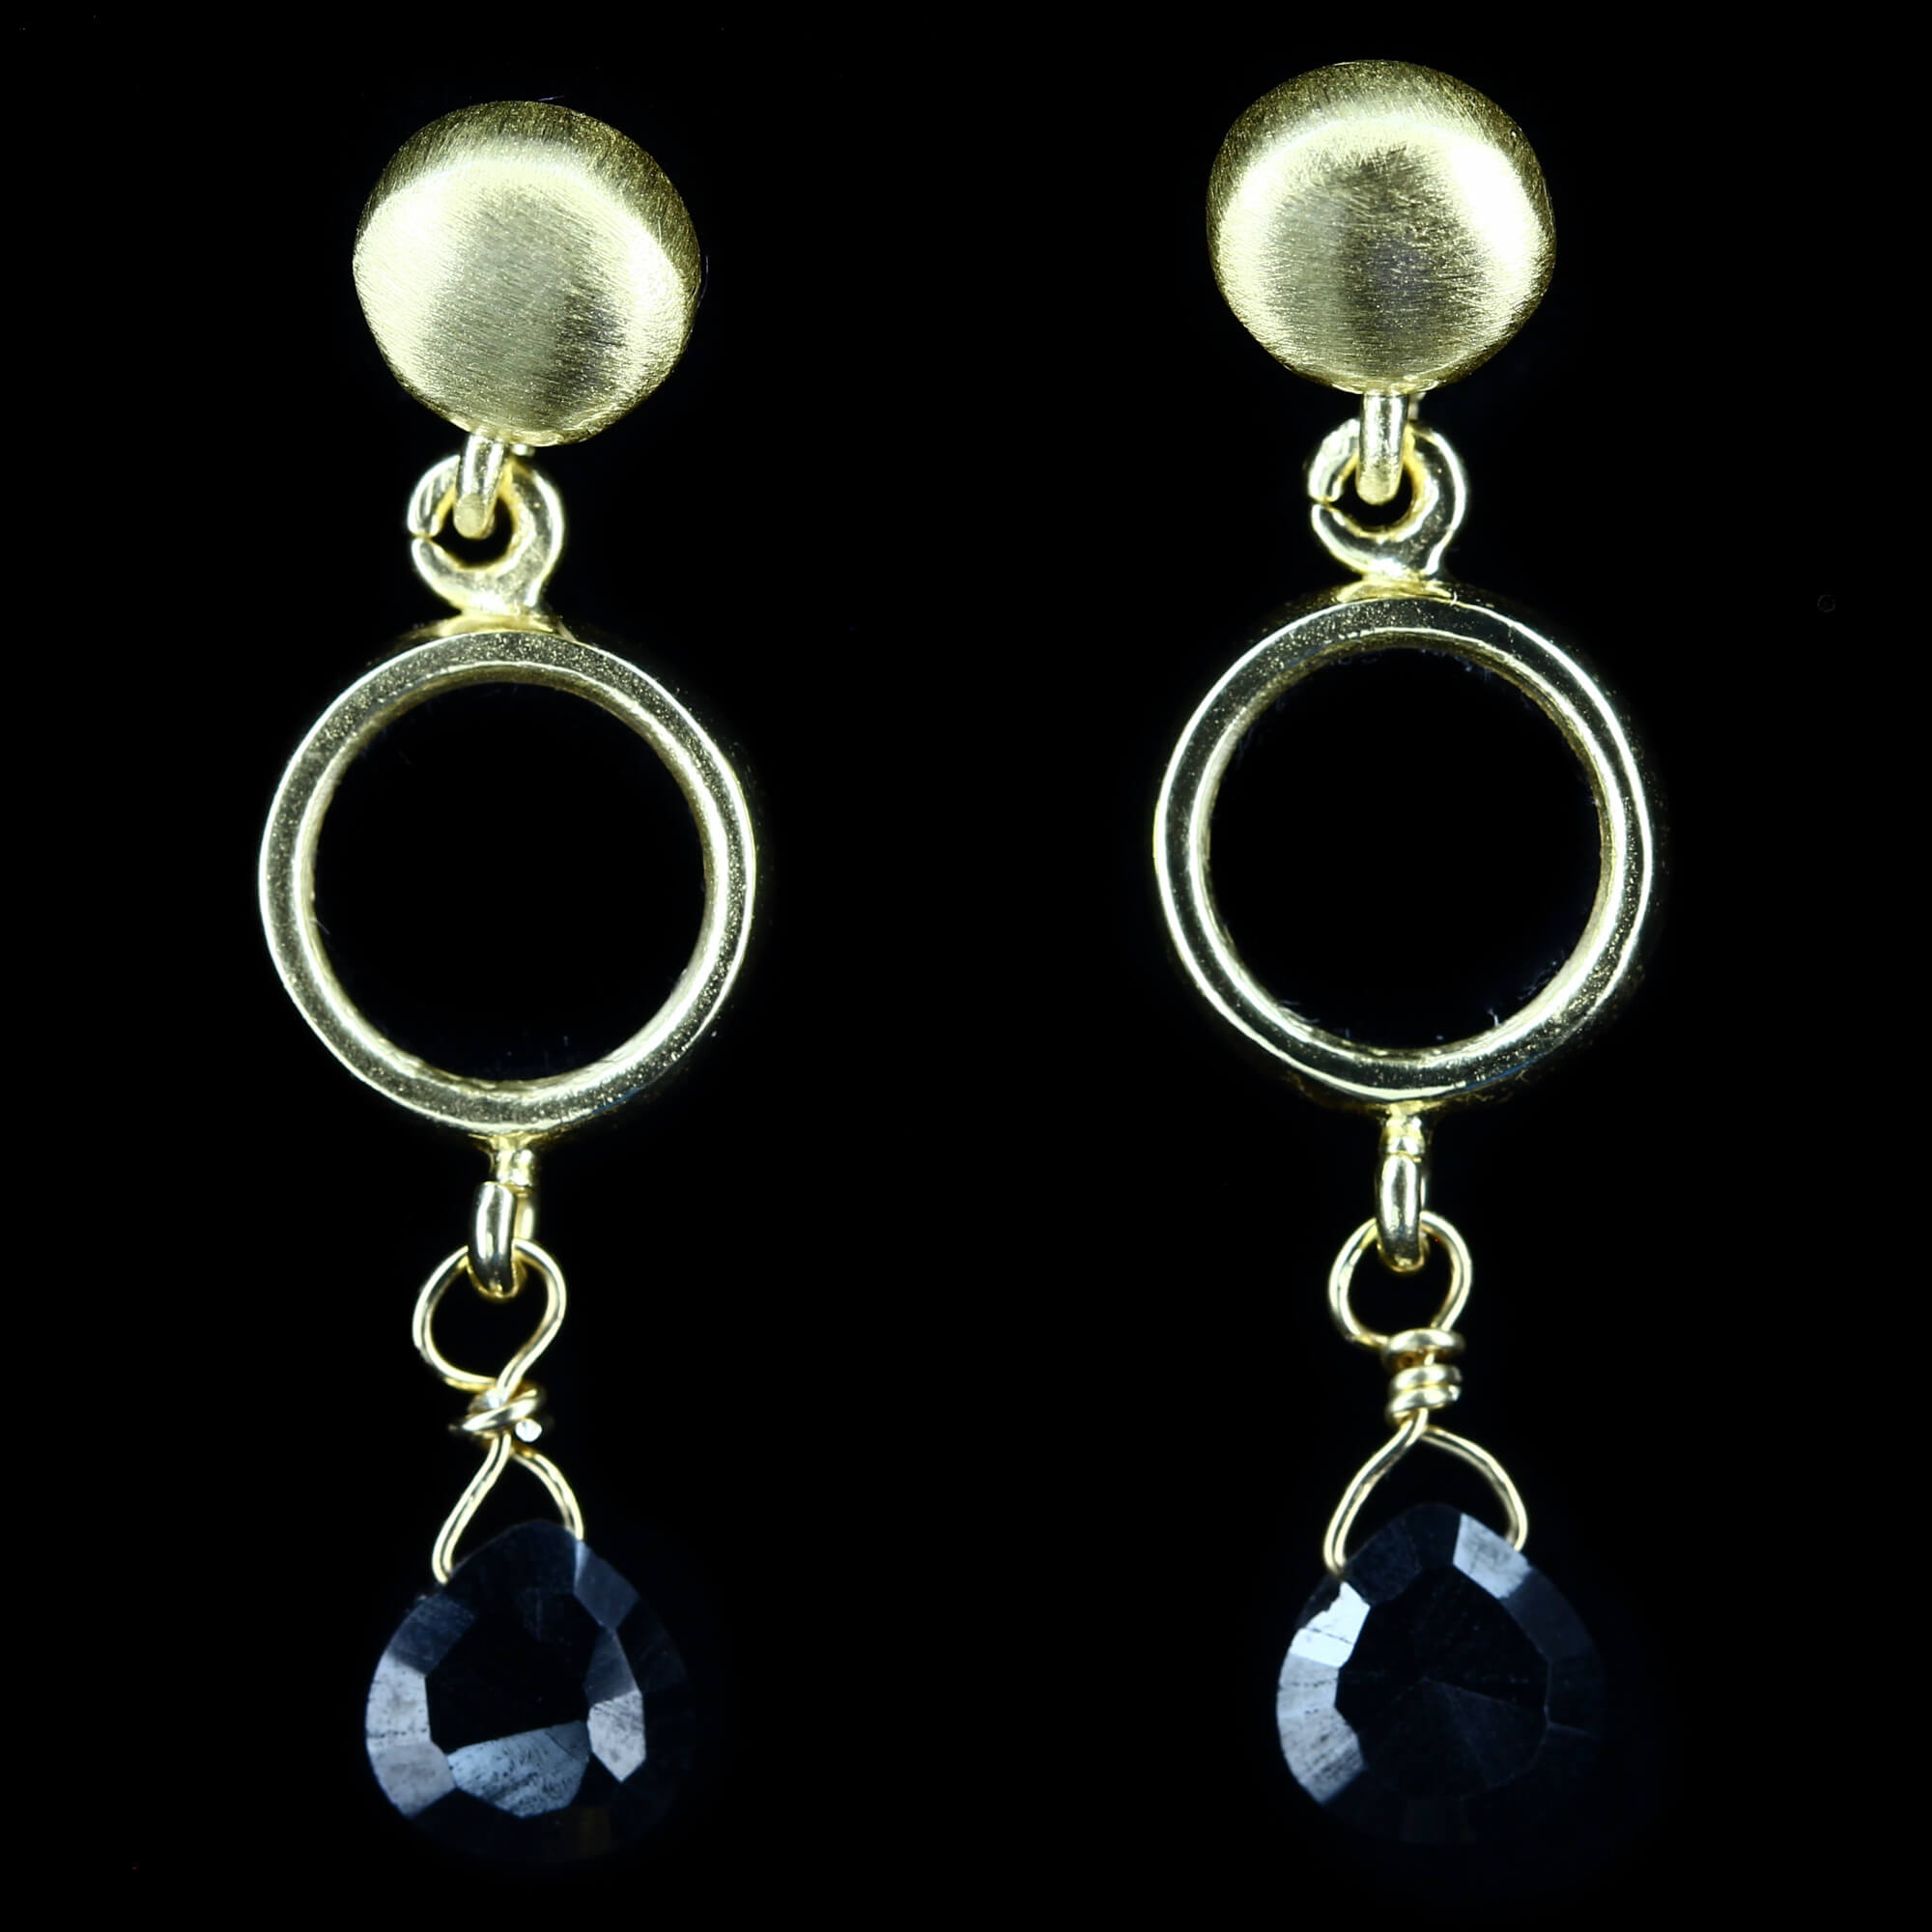 Gold plated and dependent earrings with Onyx